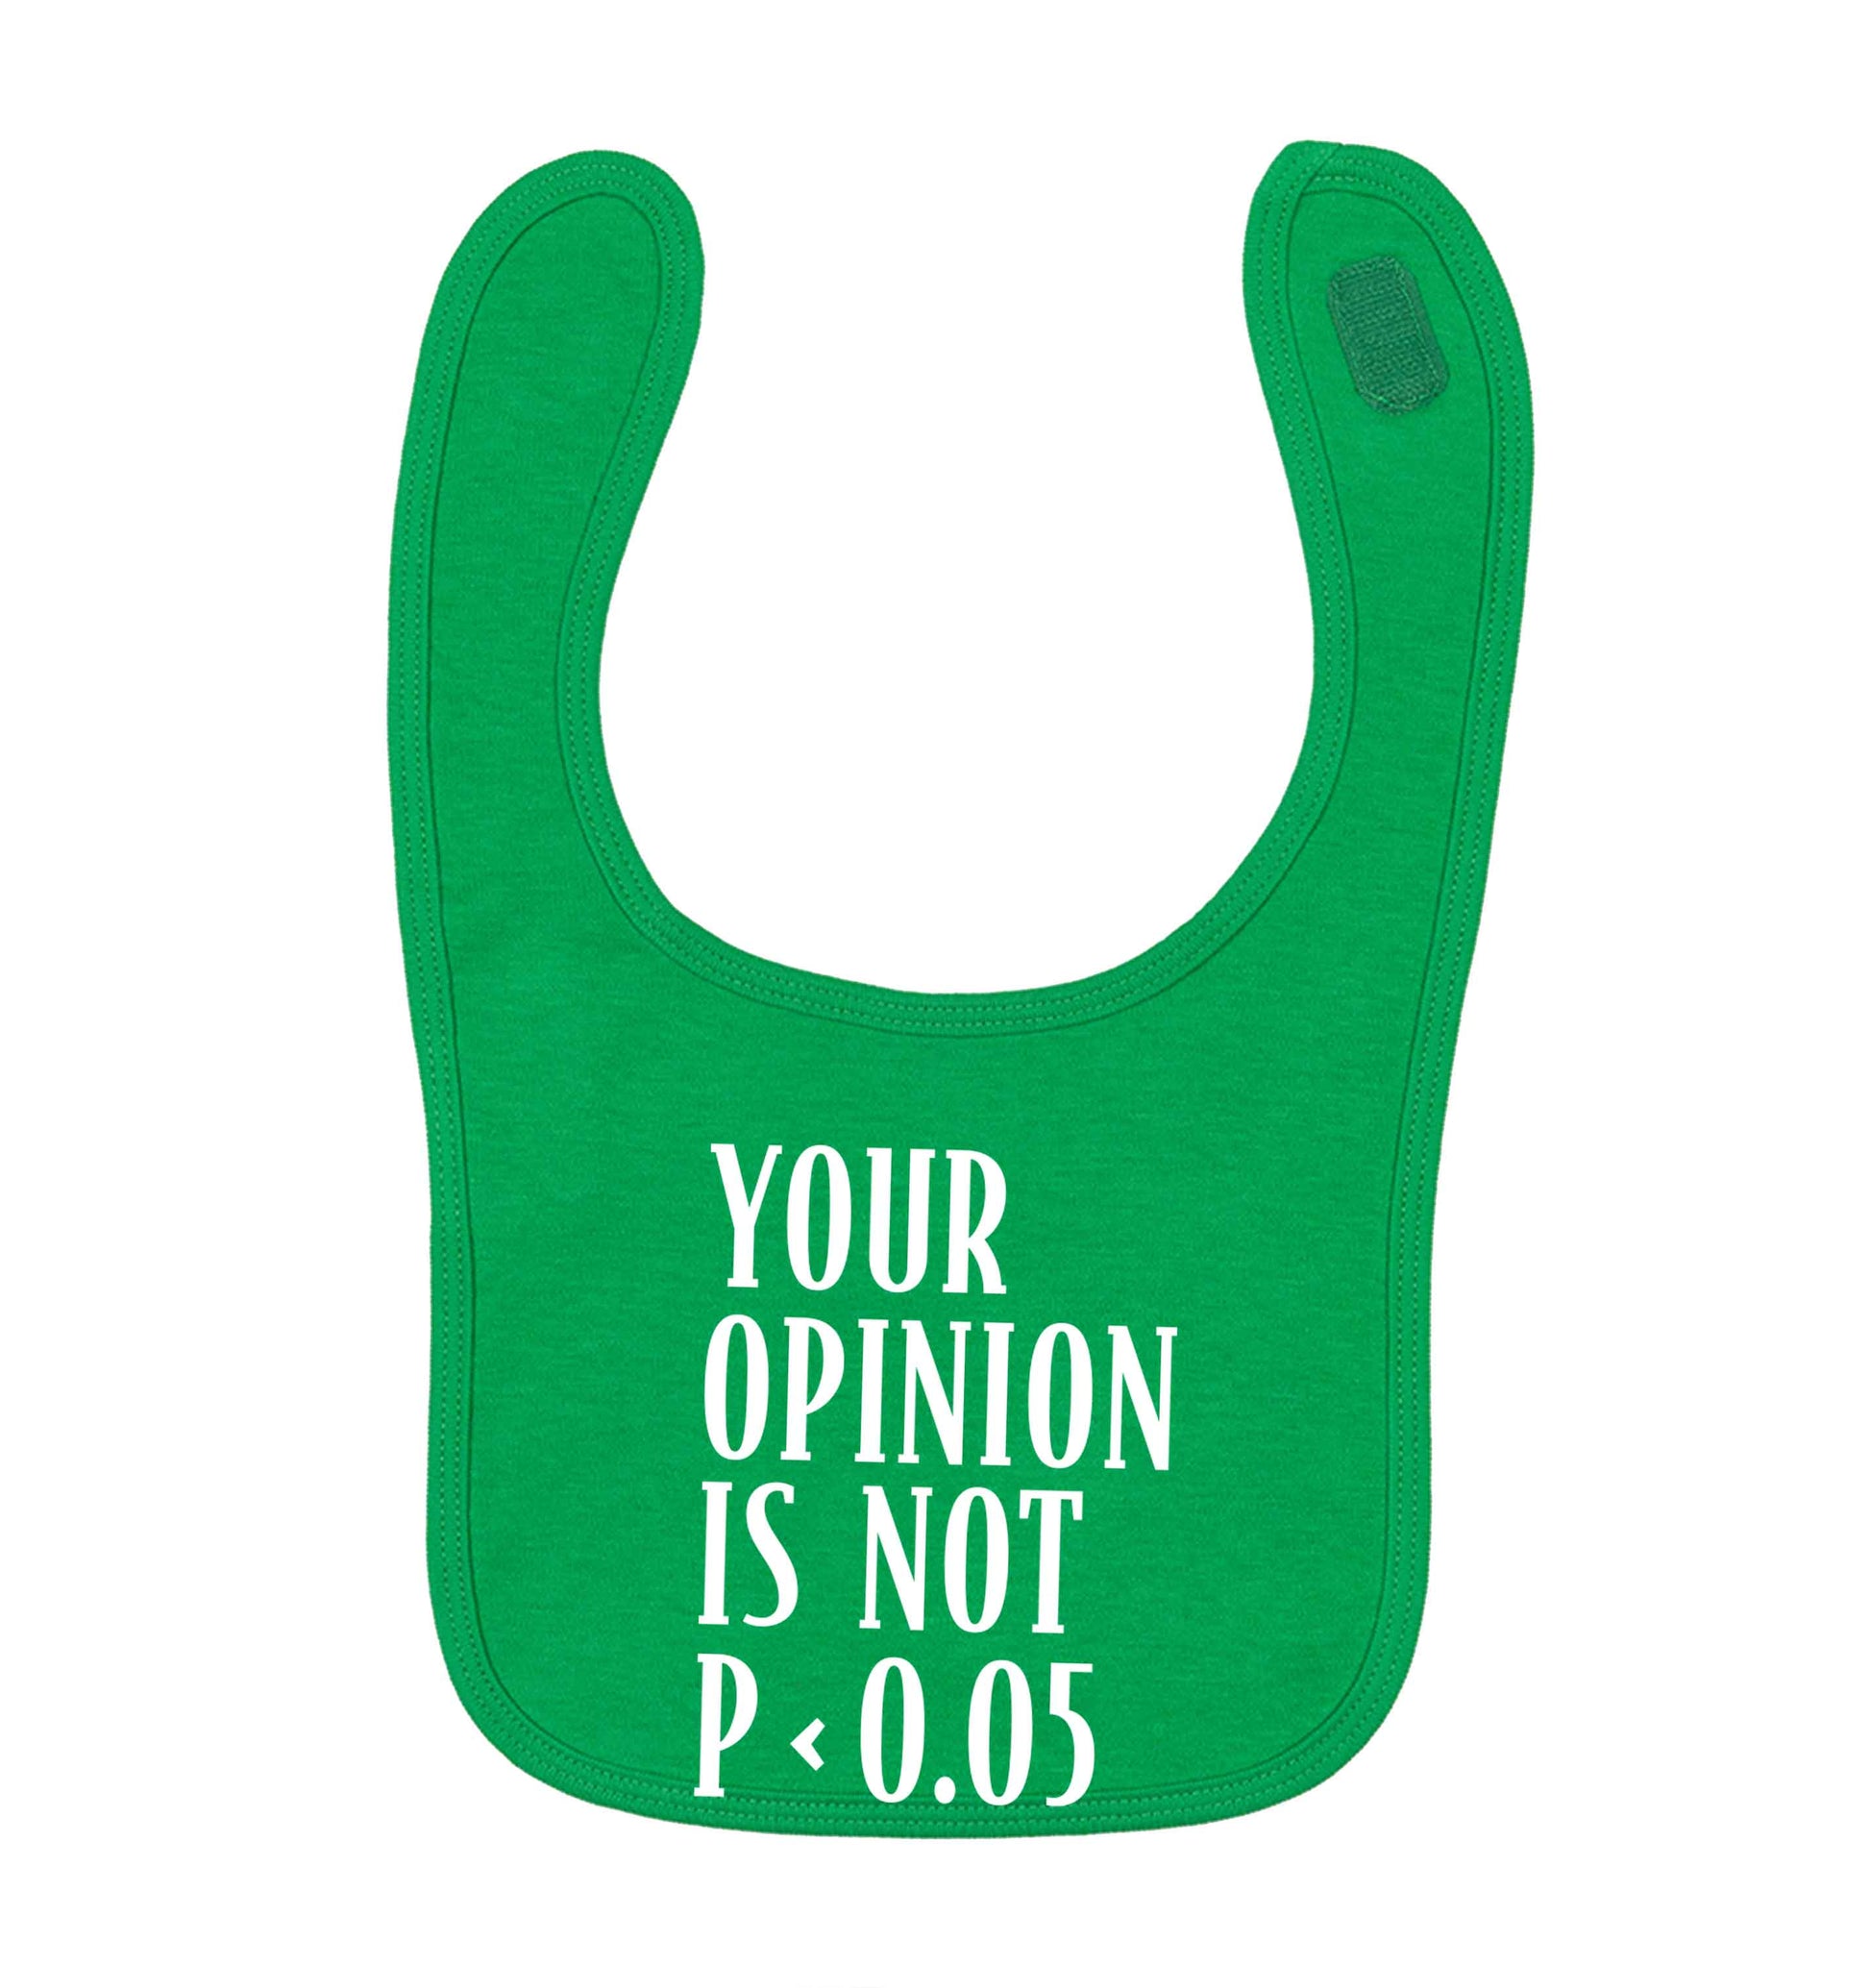 Your opinion is not P < 0.05green baby bib